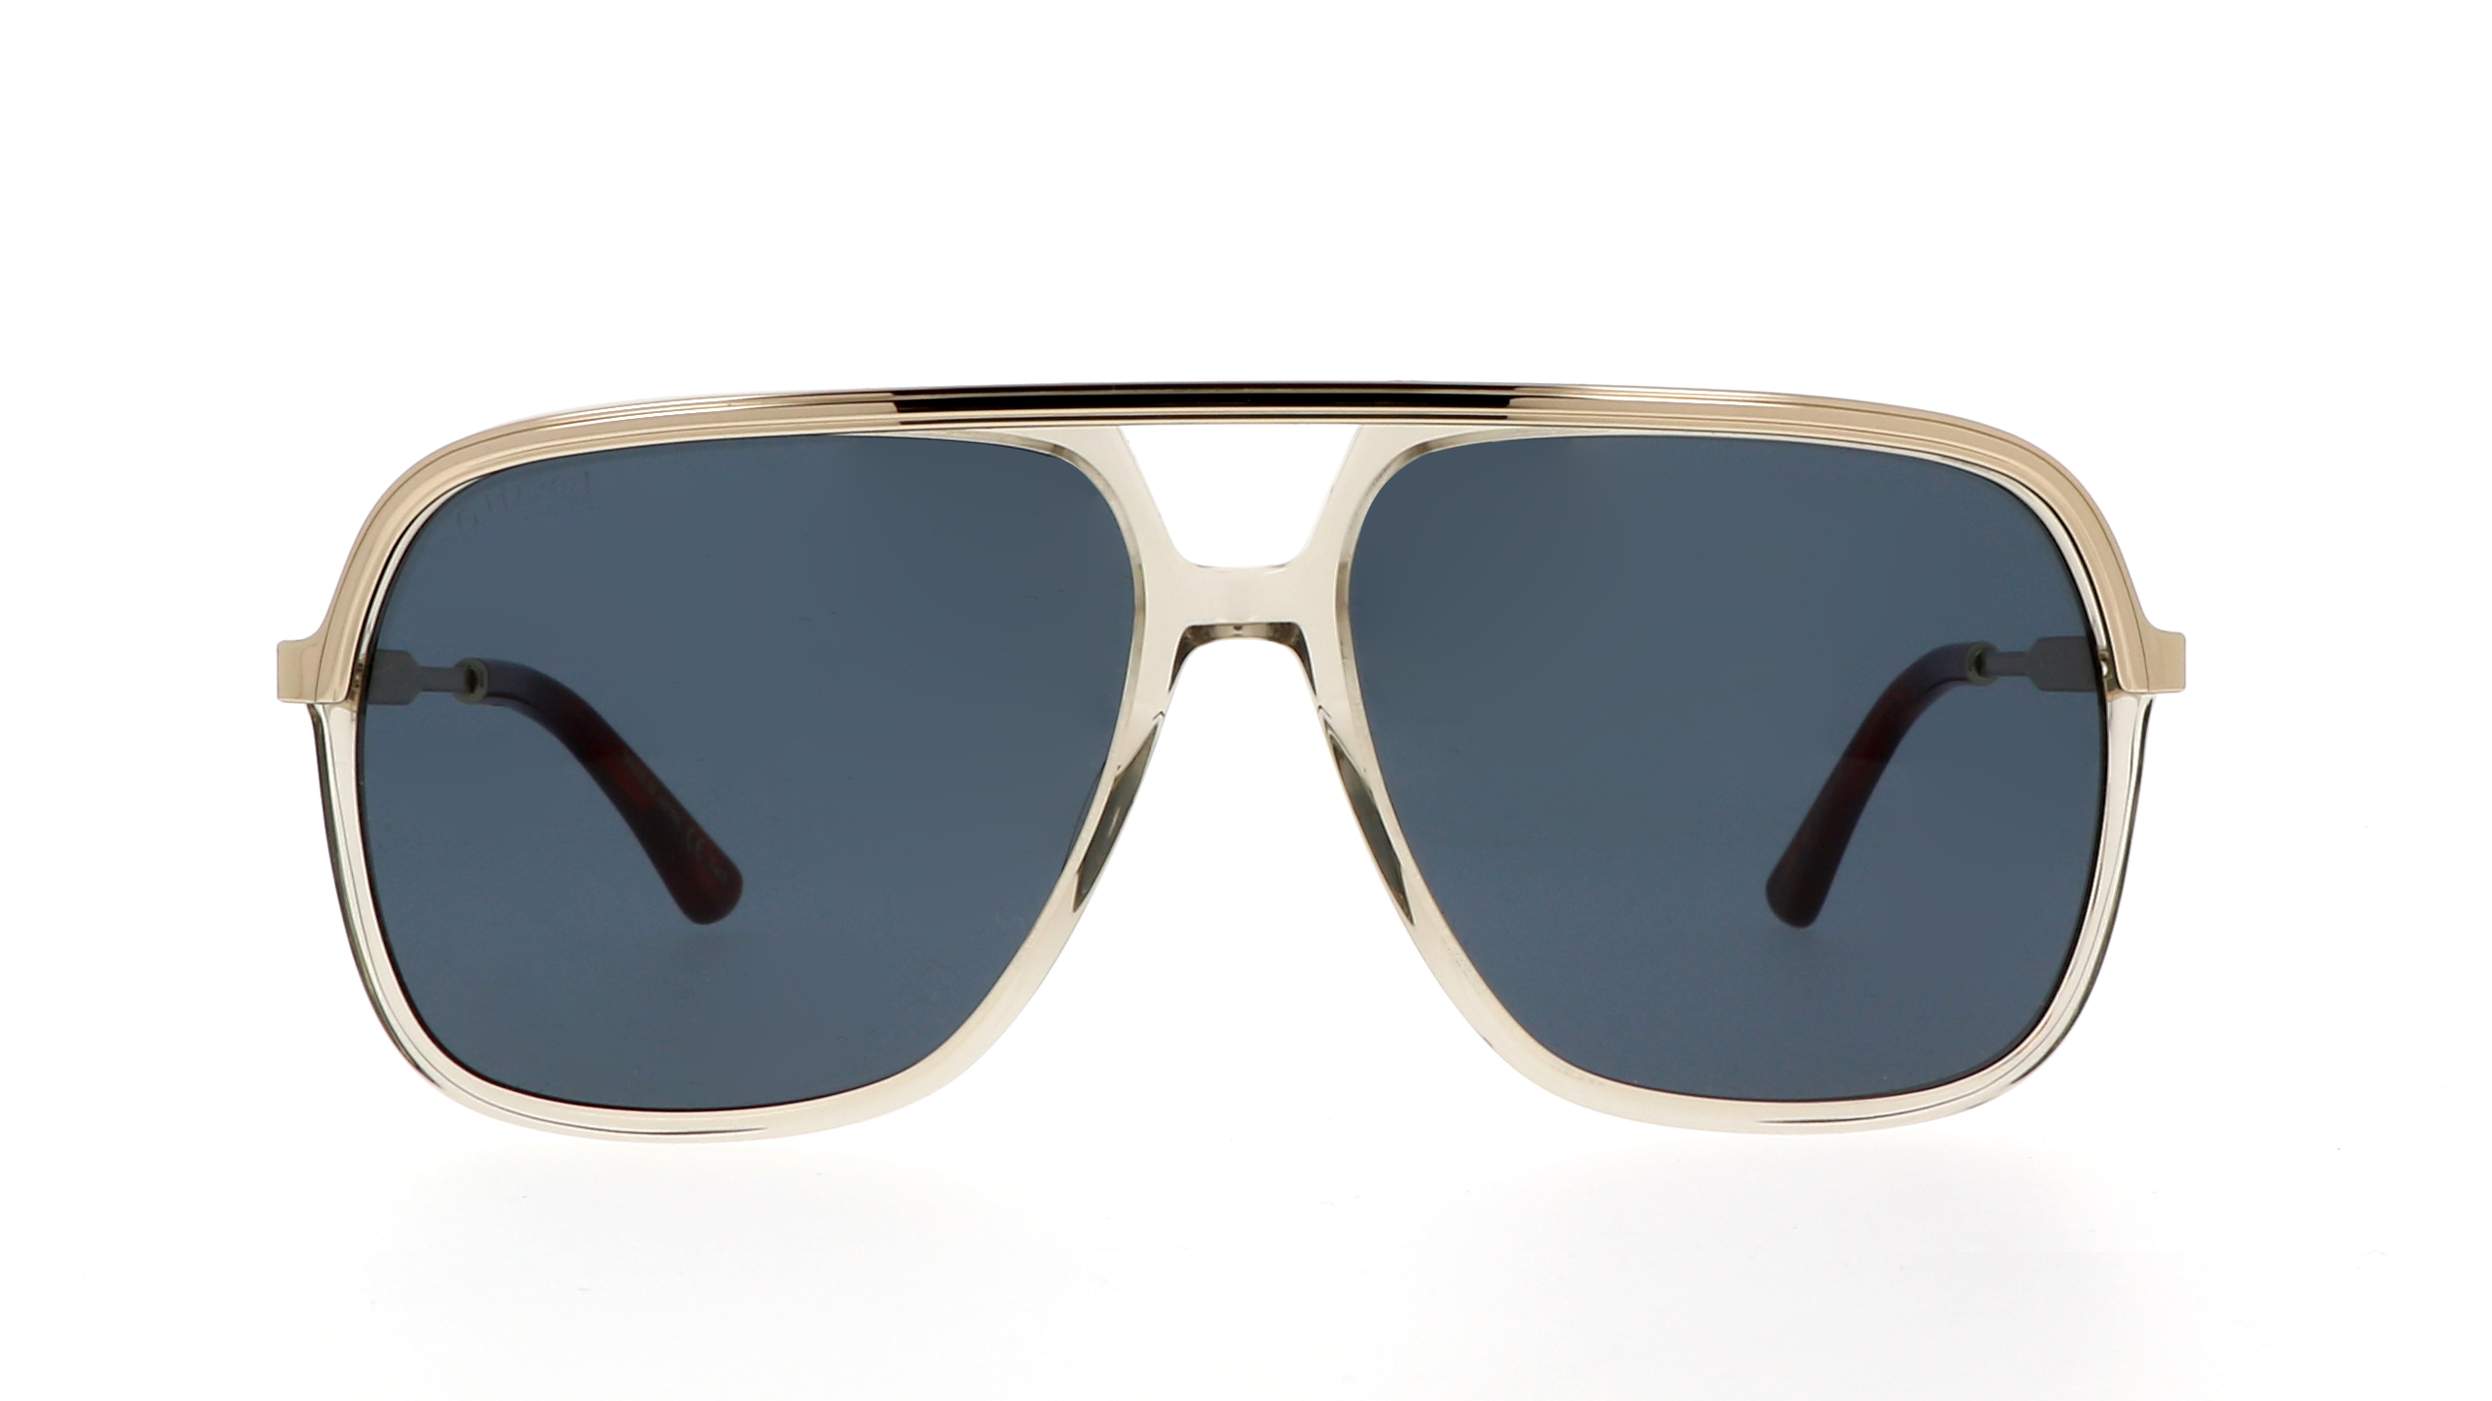 Sunglasses Gucci Gg0200s 004 57 14 Gold In Stock Price 205 79 € Visiofactory